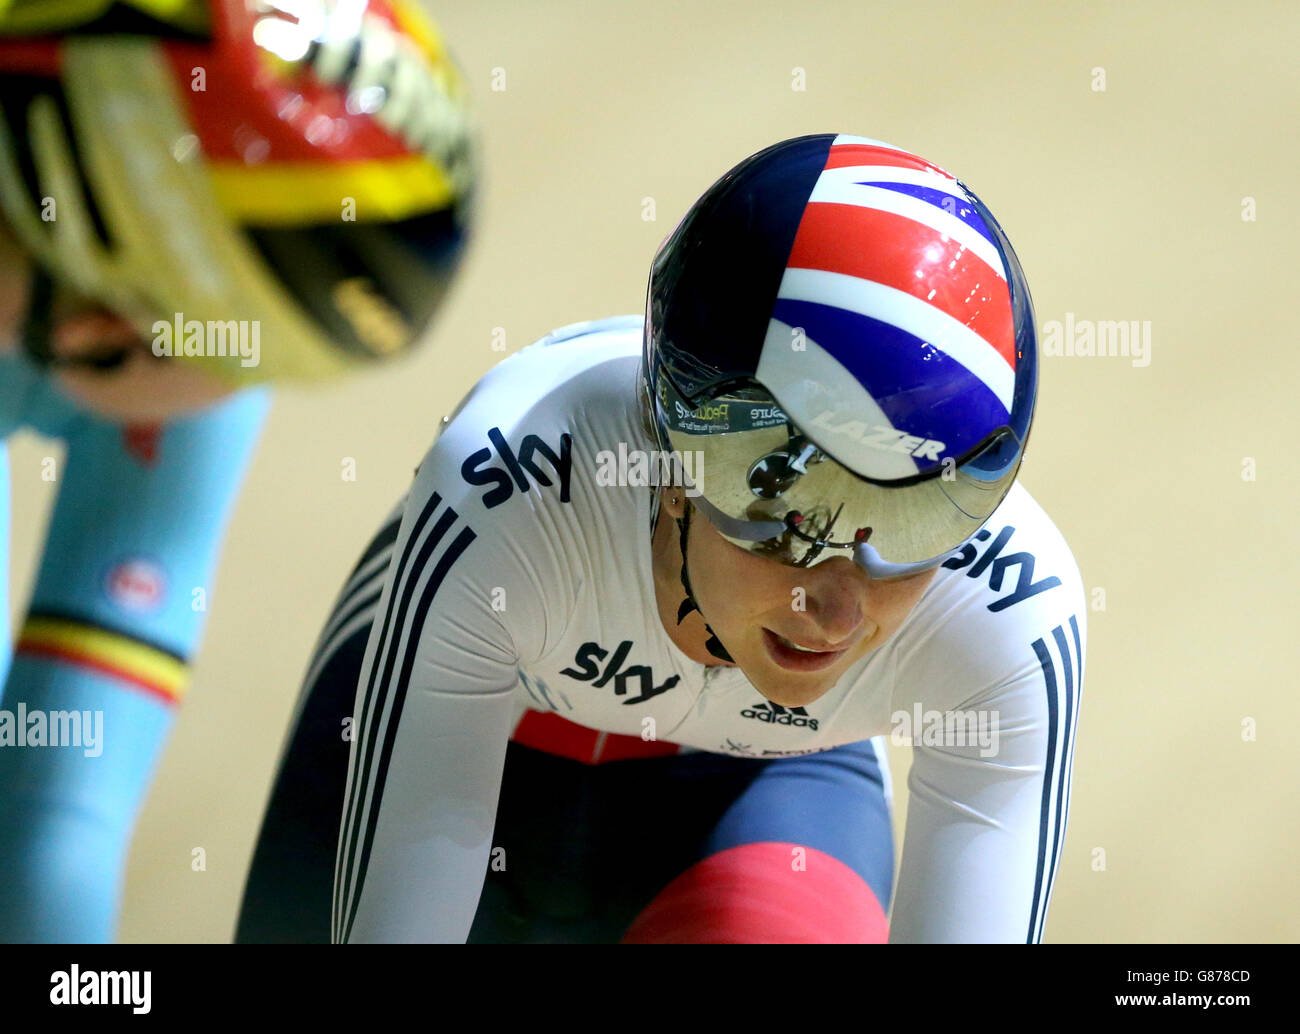 Cycling - Revolution Series - Day Three - Derby Arena. Great Britain's Laura Trott before winning the Womens Omnium Points Race during day three of the Revolution Series at Derby Arena. Stock Photo